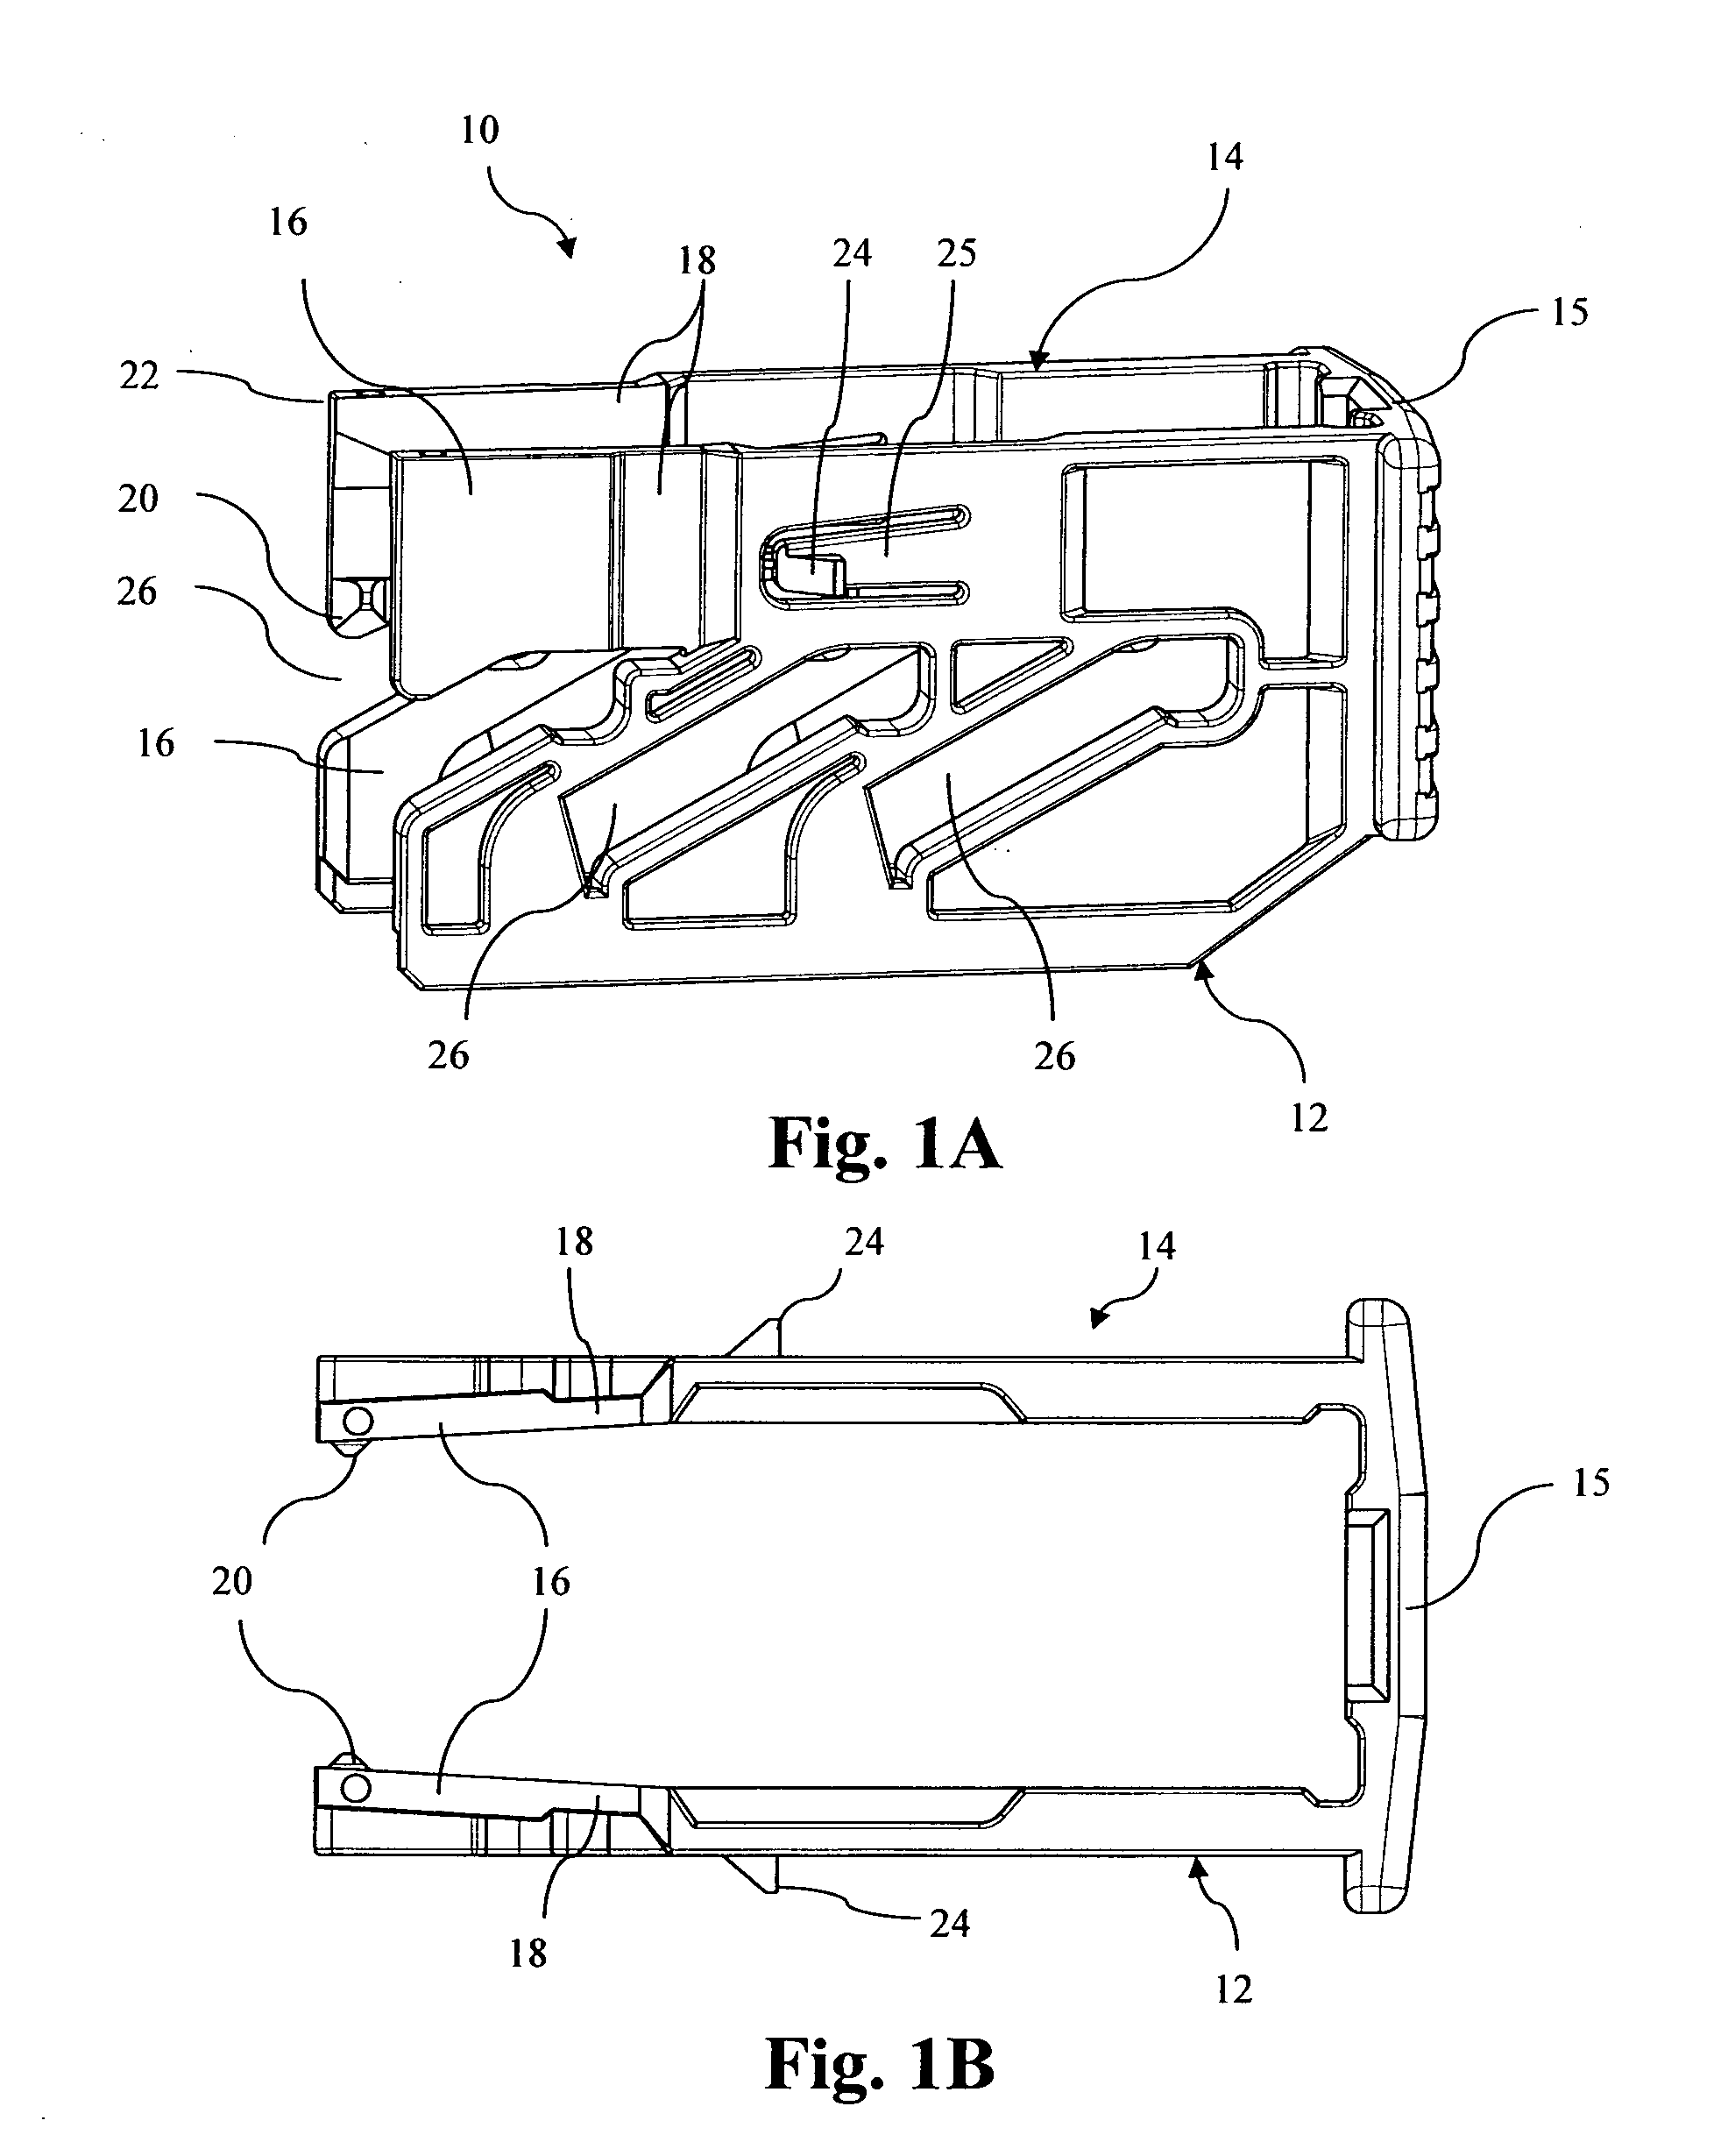 Connector arrangement with mate-assist device